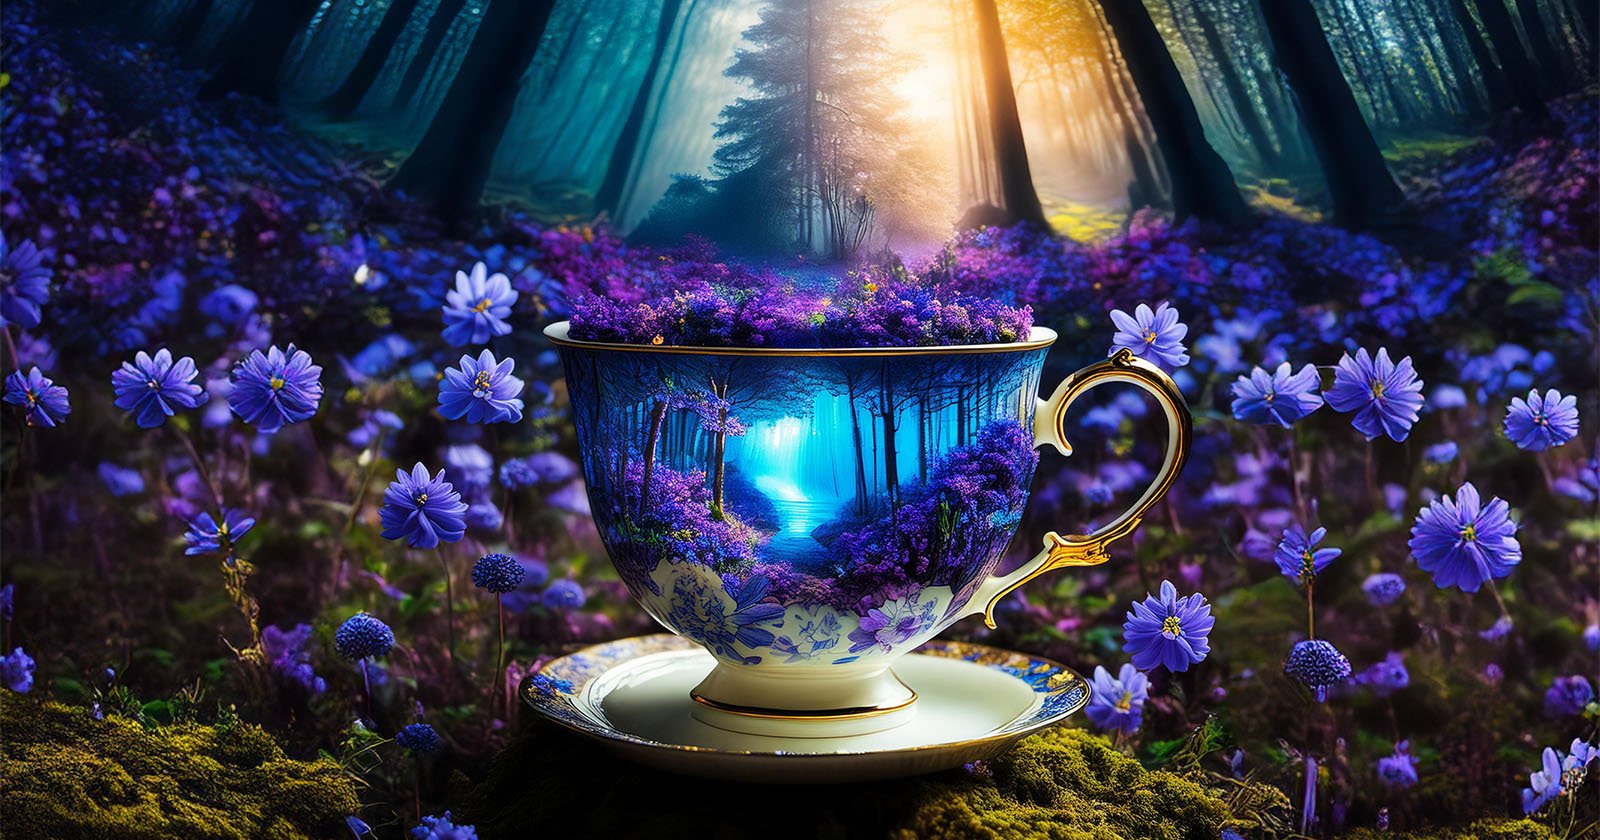 A surreal image depicting a porcelain cup on a mossy forest floor, overflowing with purple flowers and a miniature enchanted forest scene glowing within it, surrounded by similar flowers.